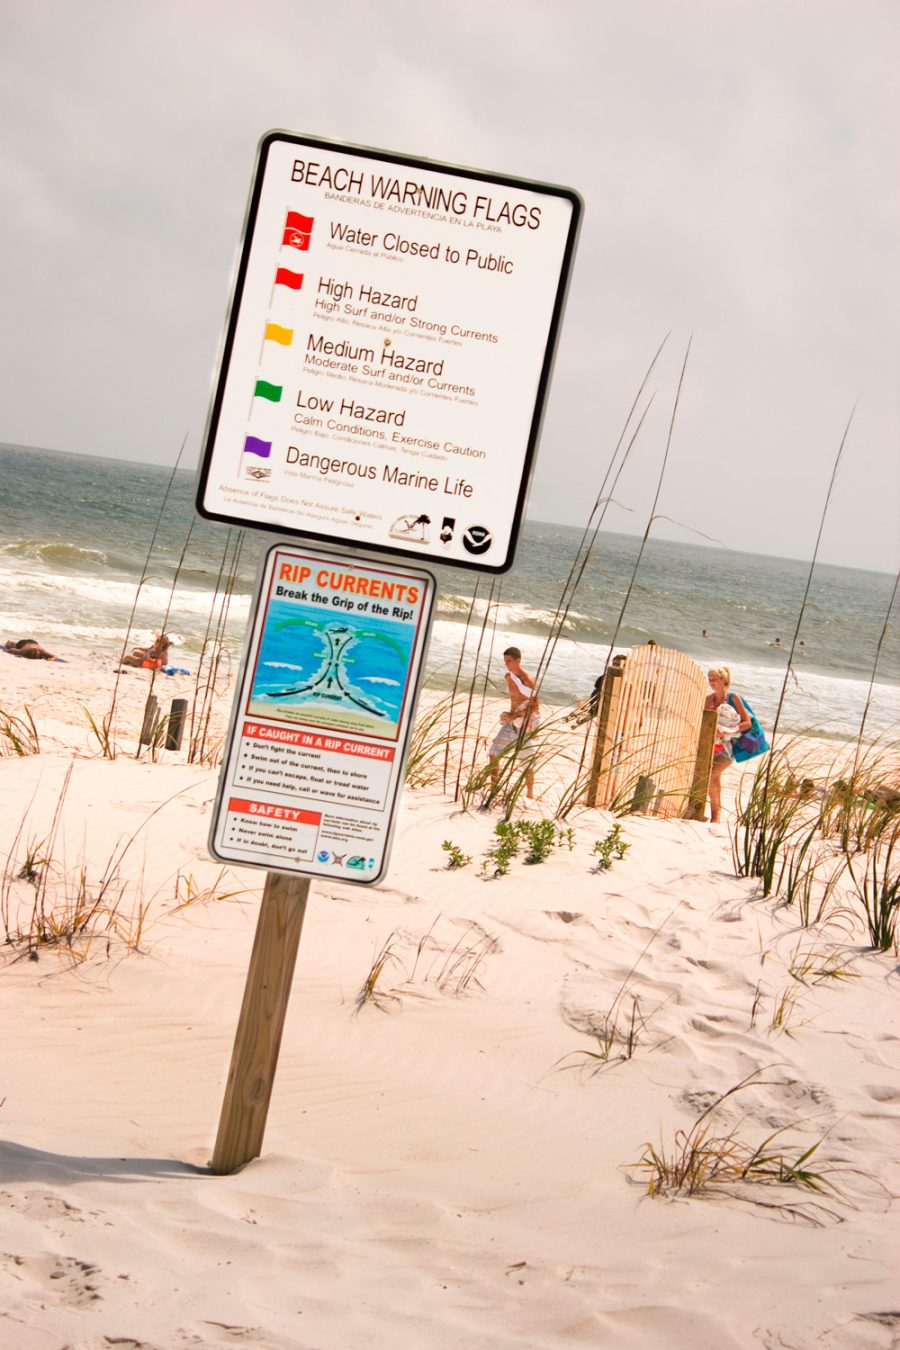 Sign explaining the meaning of beach warning flags and rip currents